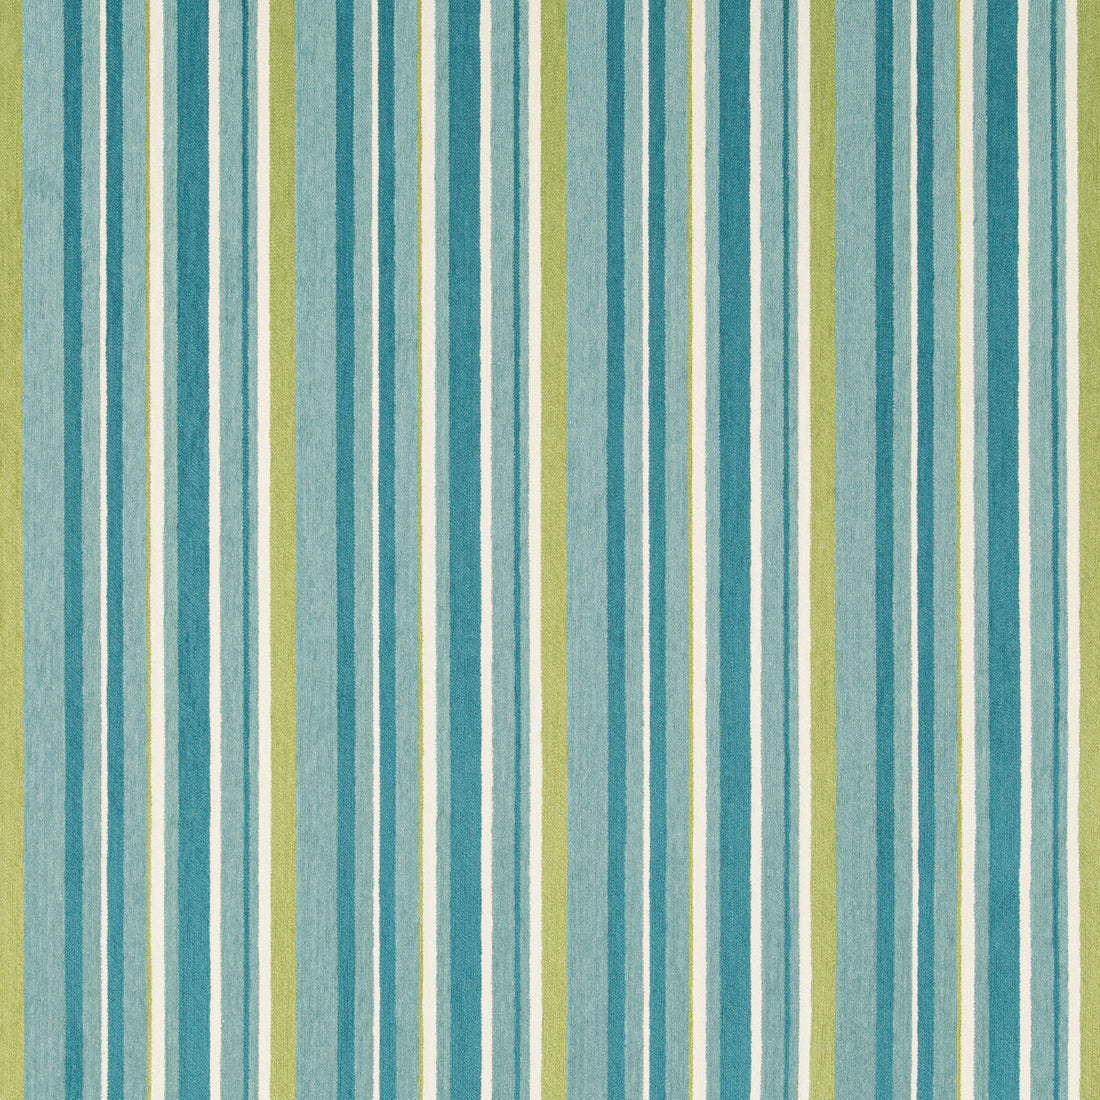 Causeway fabric in lagoon color - pattern 35868.5.0 - by Kravet Contract in the Gis Crypton collection